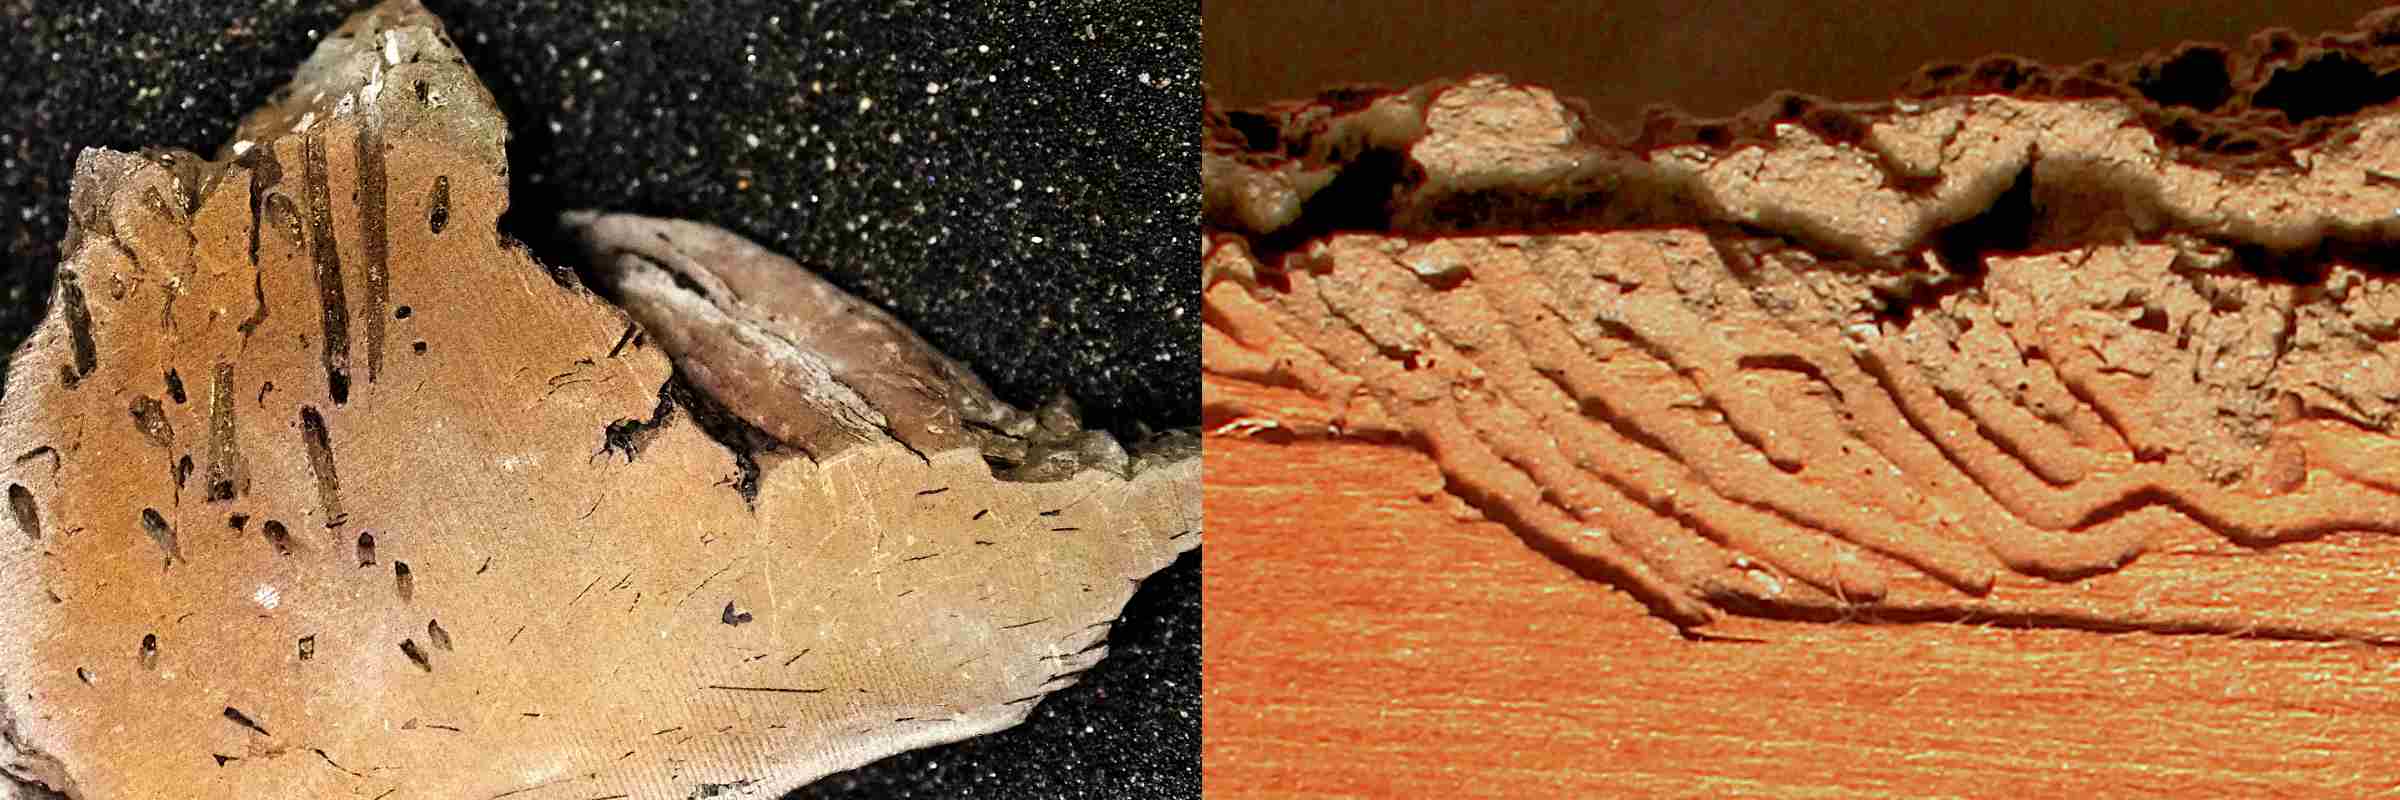 Photos comparing a piece of the fossil (left) to gribble borings in wood collected from Willapa Bay, Washington (right). Both photos are 6 cm wide. Photo credit: Scott Melnyk